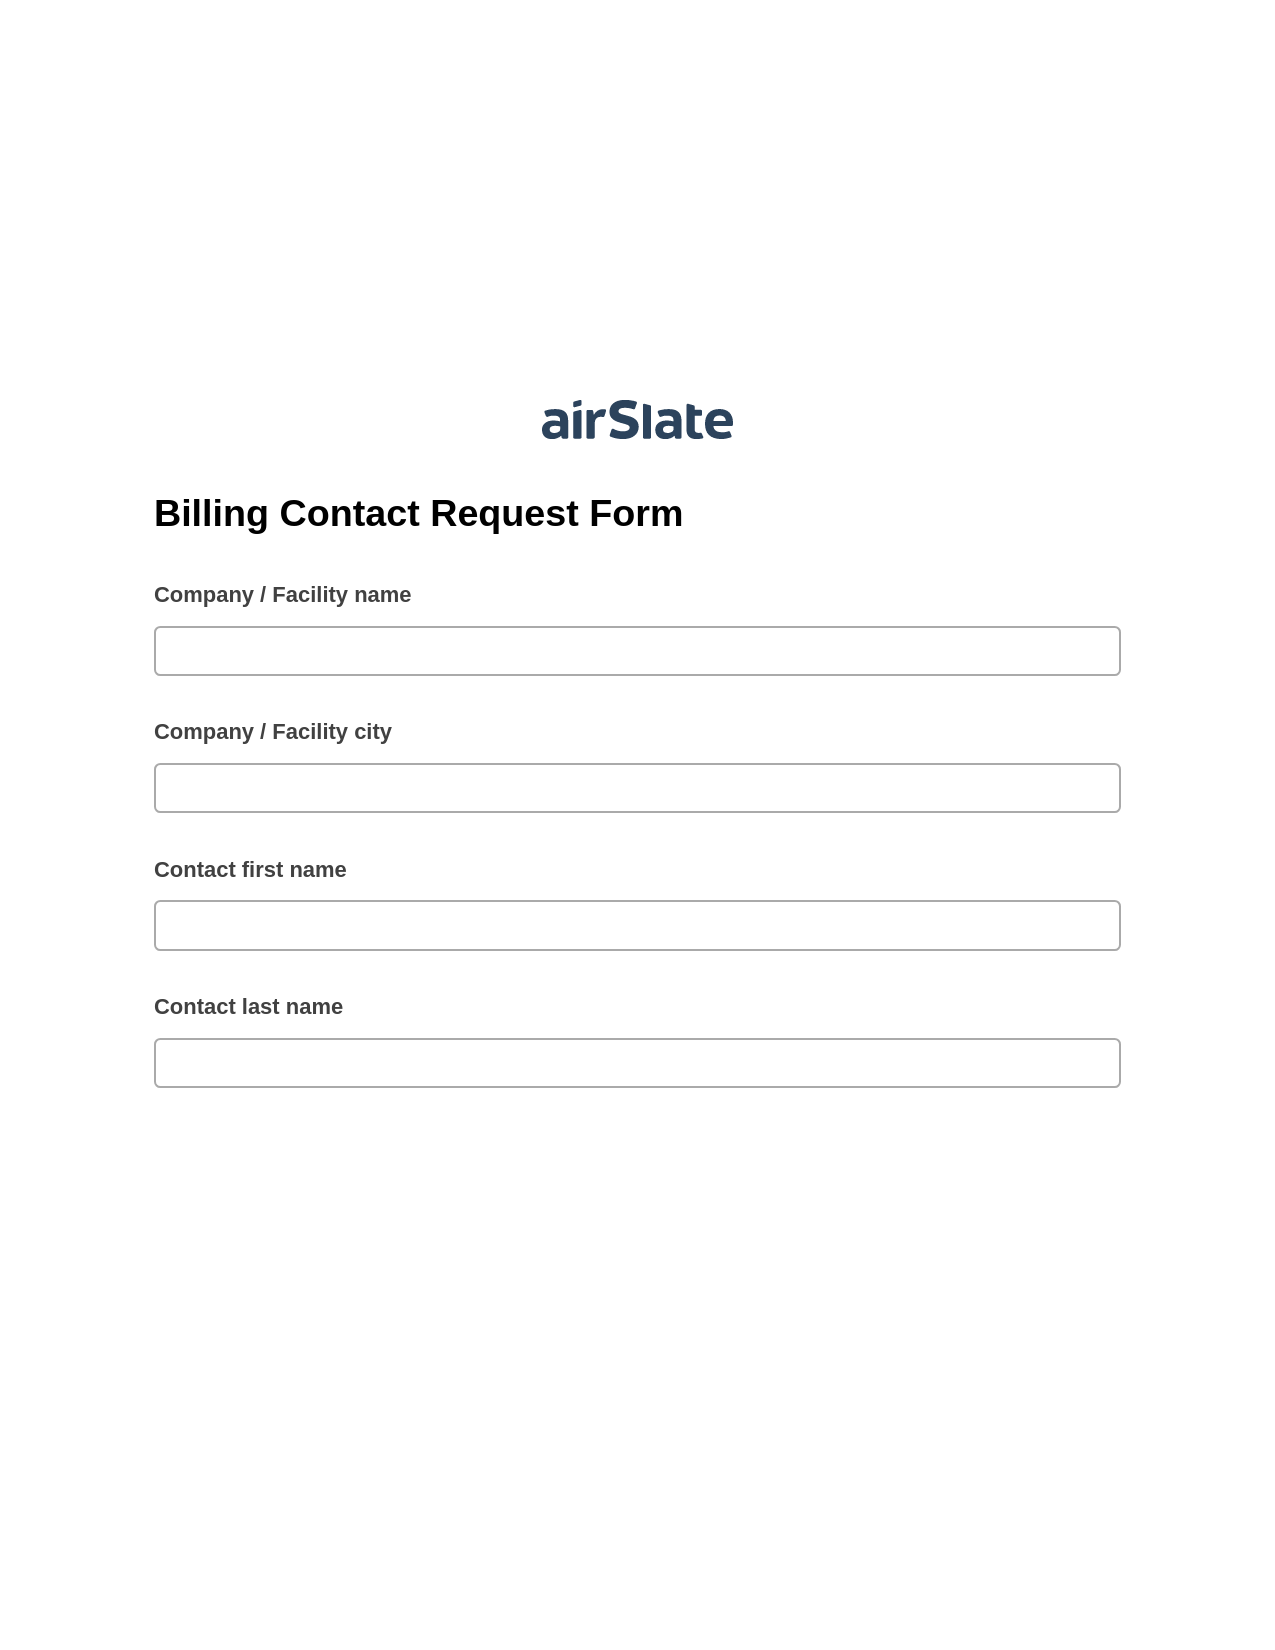 Multirole Billing Contact Request Form Pre-fill Dropdowns from Google Sheet Bot, Update Salesforce Record Bot, Box Bot